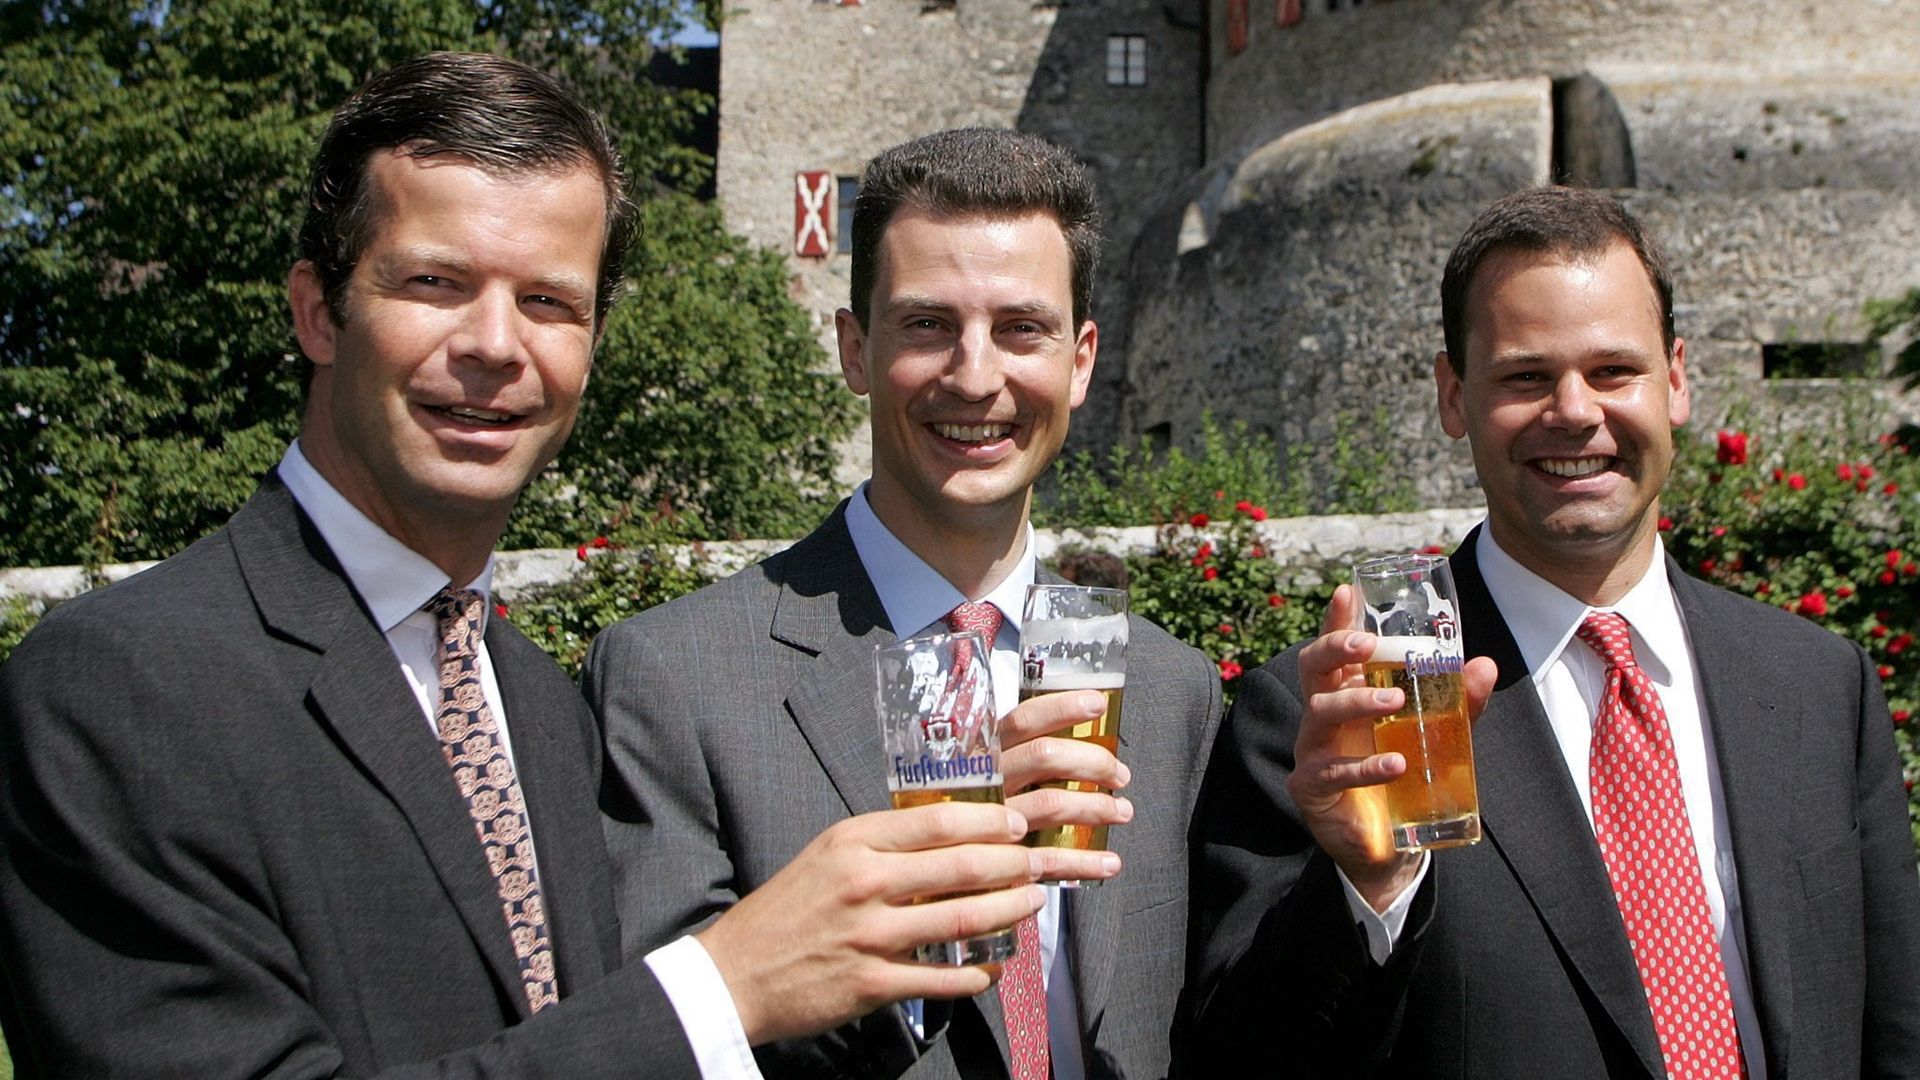 Liechtenstein royal family in mourning following death of prince, aged 51